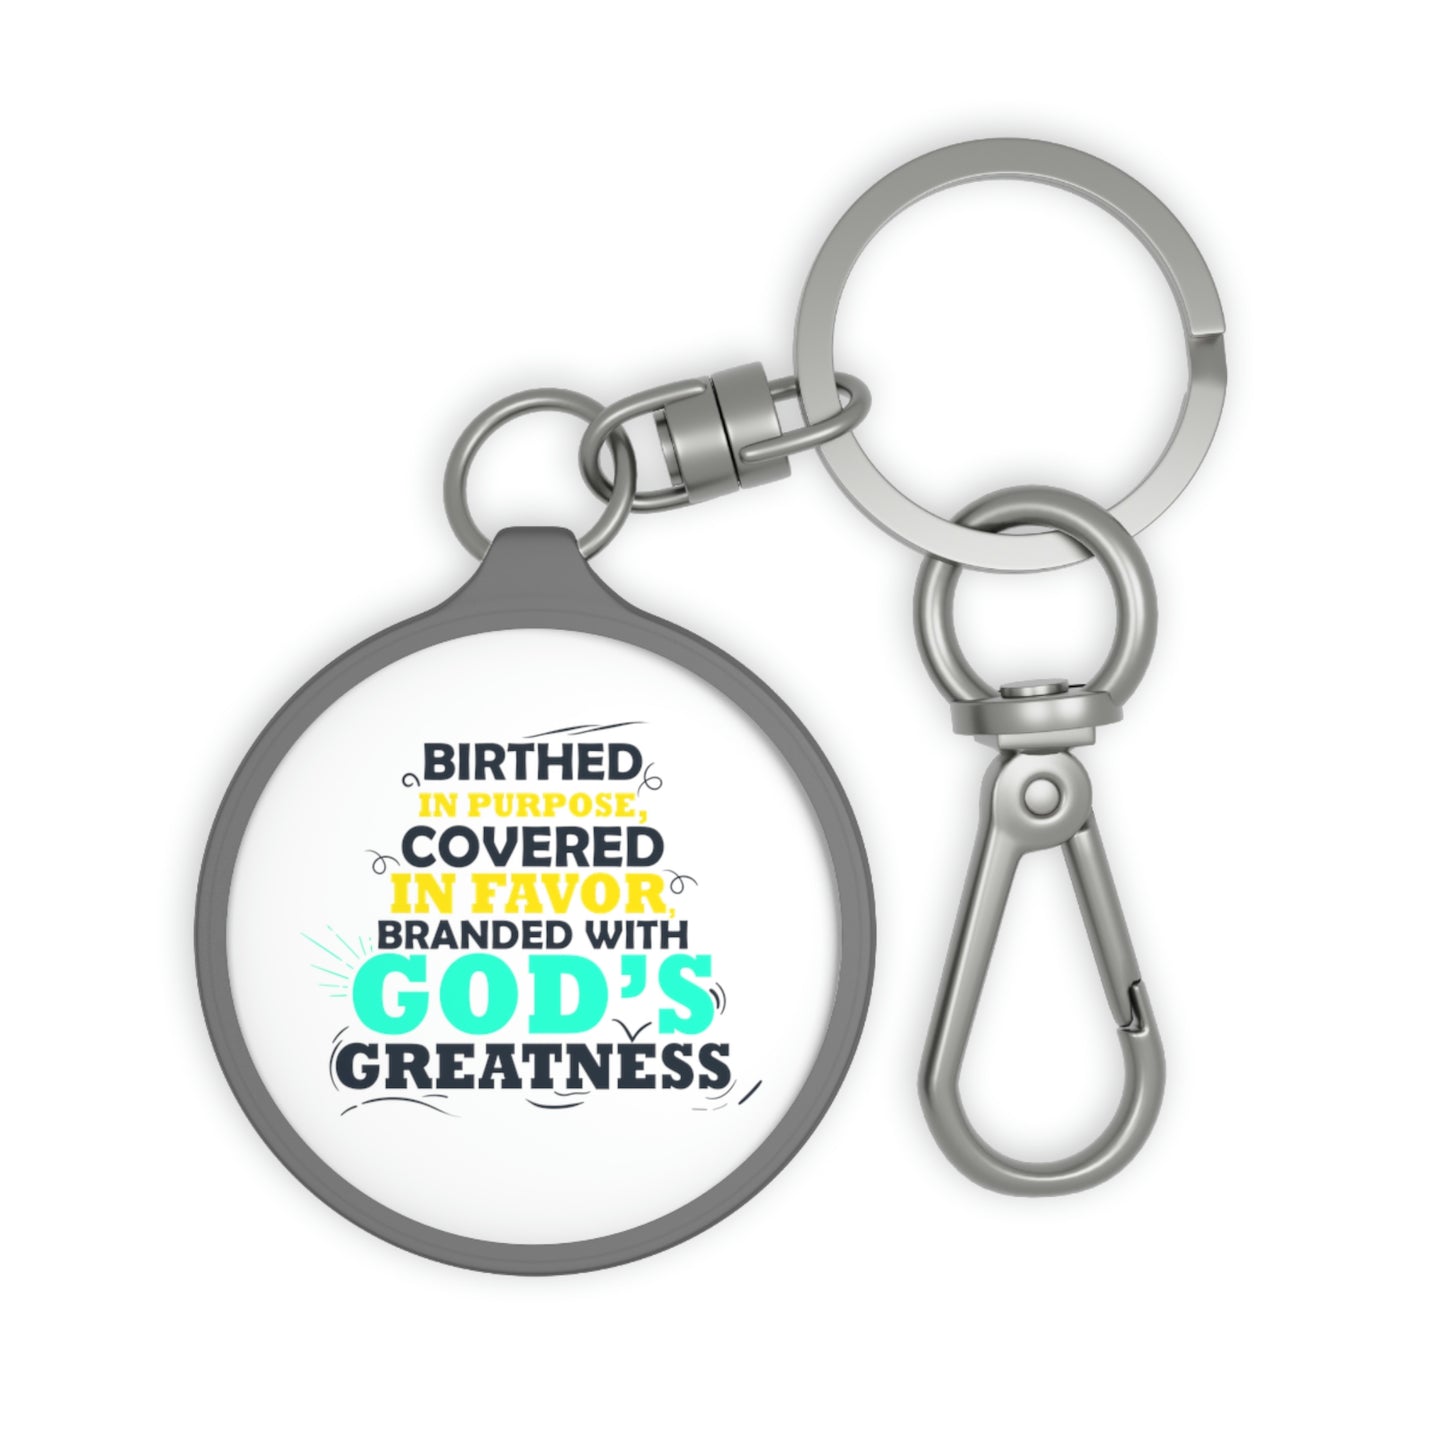 Birthed In Purpose, Covered In Favor, Branded With God's Greatness Key Fob